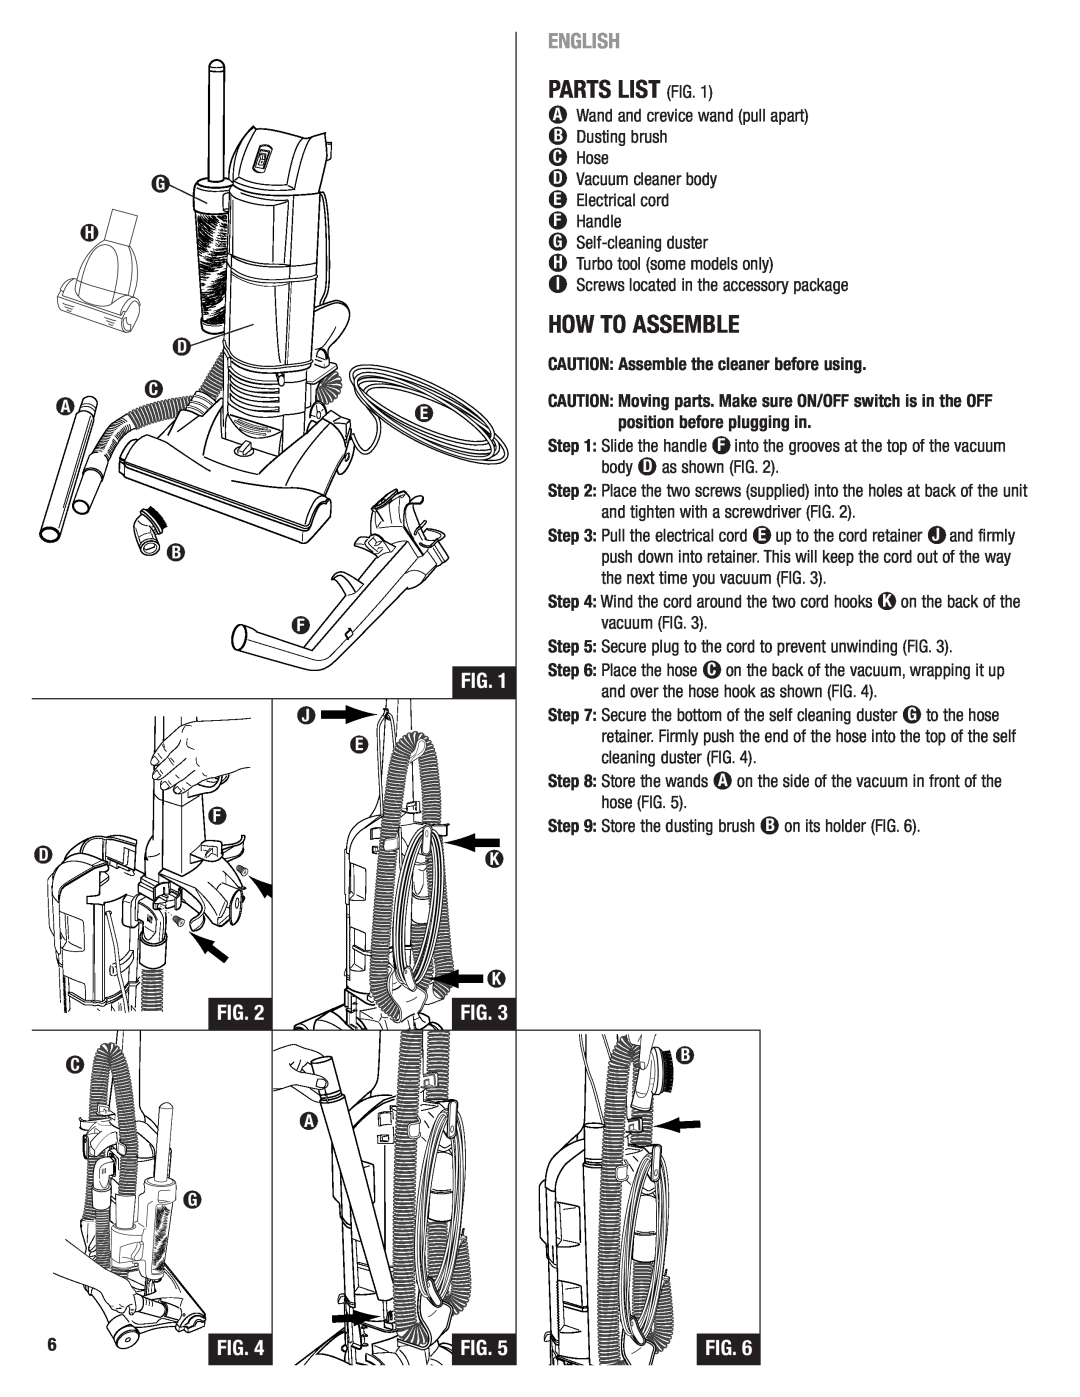 Eureka 2940 manual Parts List Fig, How To Assemble, English, position before plugging in 